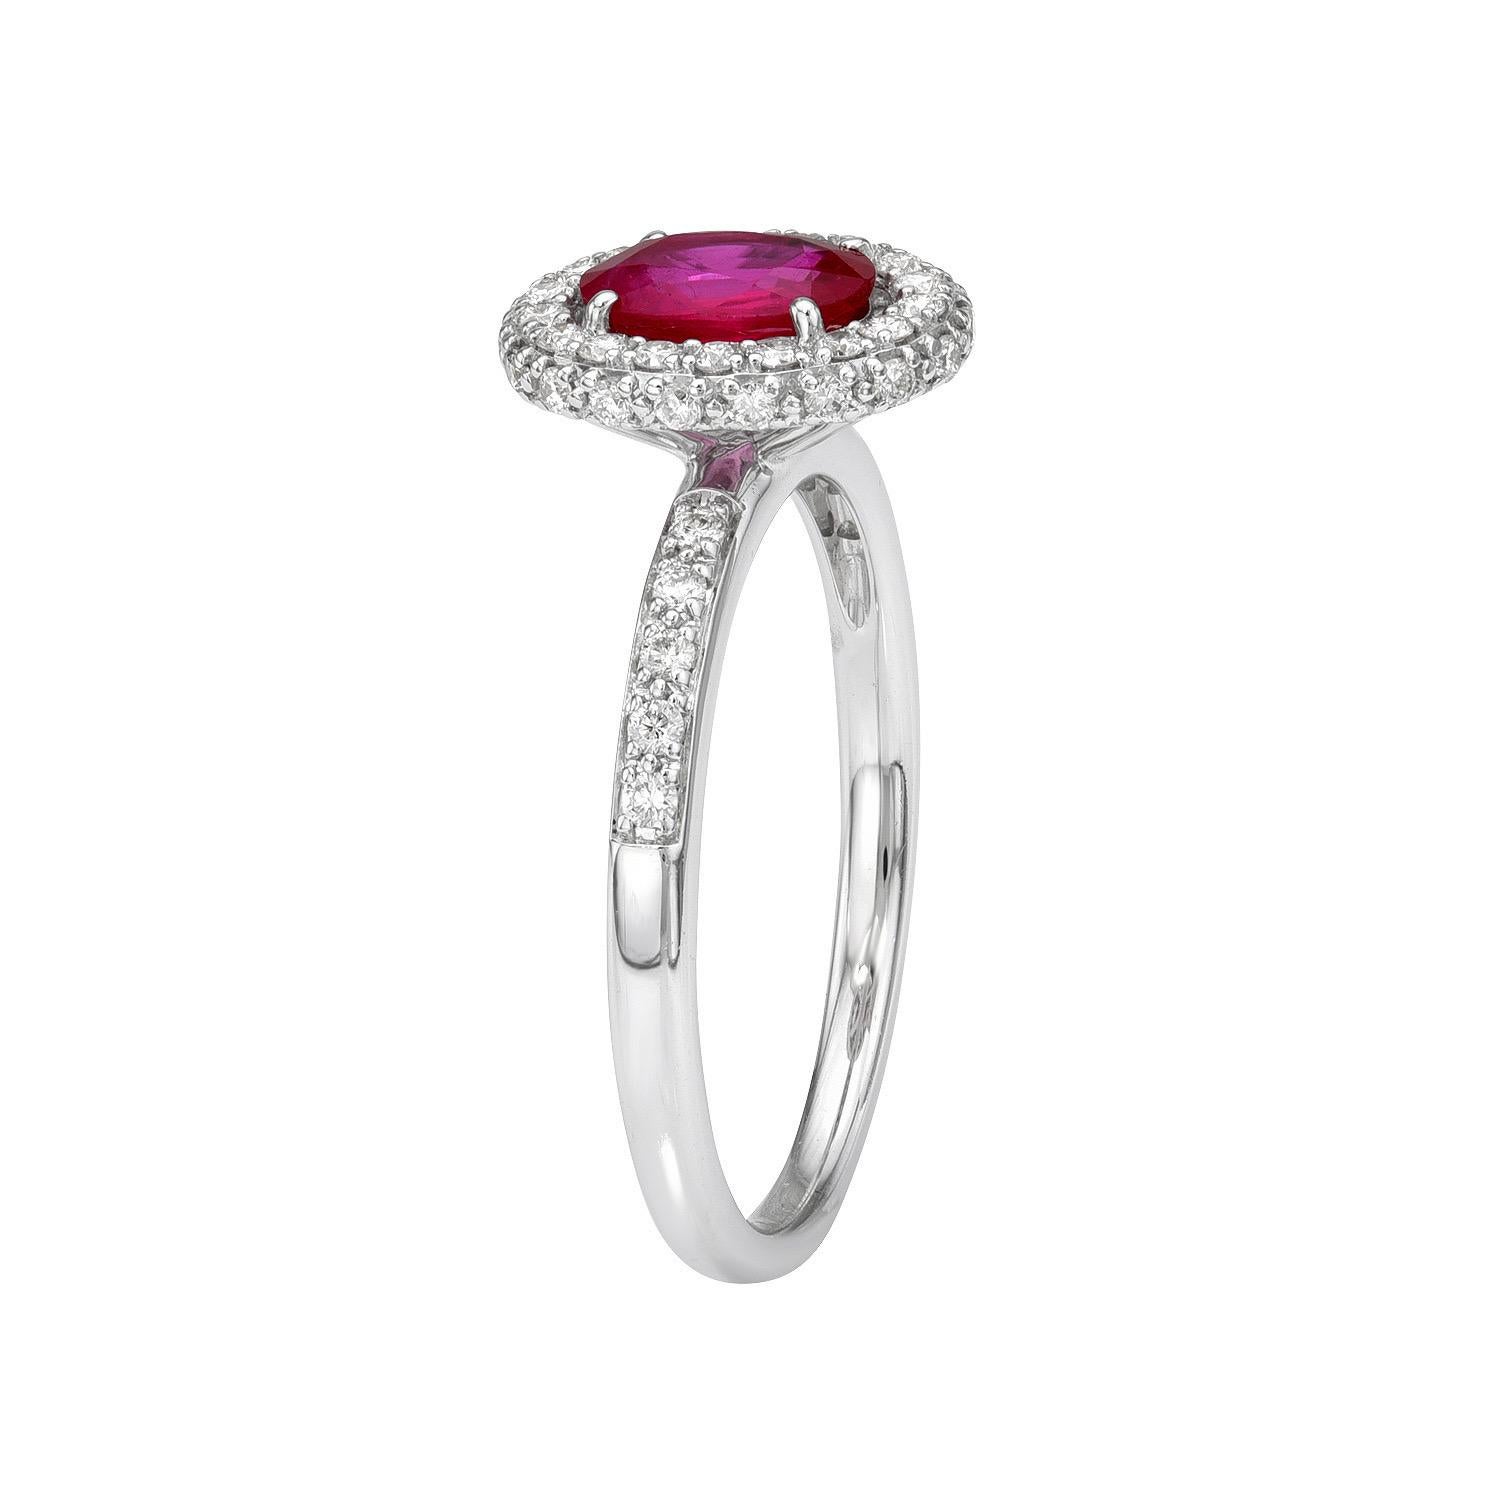 Bright 0.80 carat Ruby oval 18K white gold engagement ring, decorated with round brilliant diamonds totaling 0.35 carats.
Ring size 6.5. Resizing is complementary upon request.
Returns are accepted and paid by us within 7 days of delivery.